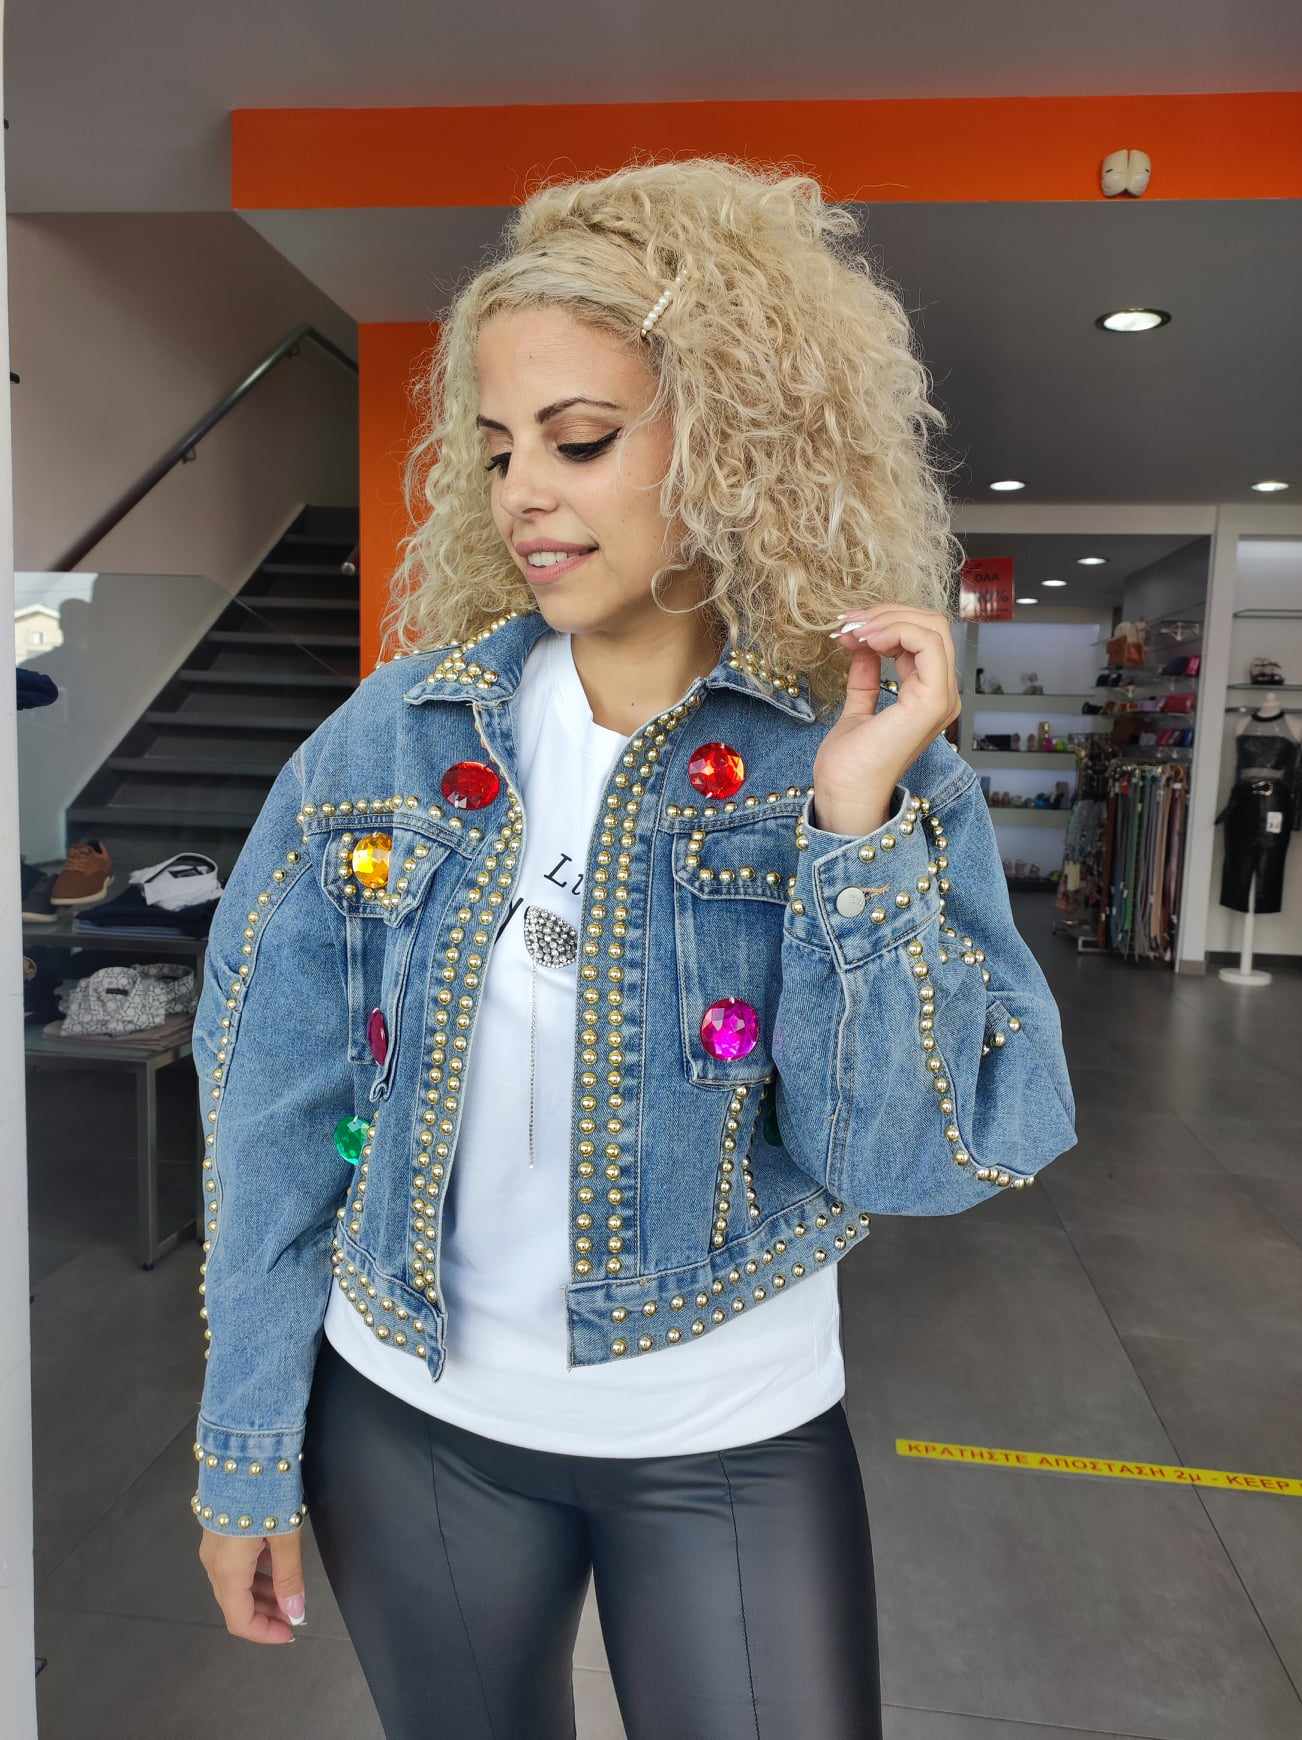 JACKET REGULAR 23/24 ΜΟΝΟC. JEANS WITH COLORFUL STONES